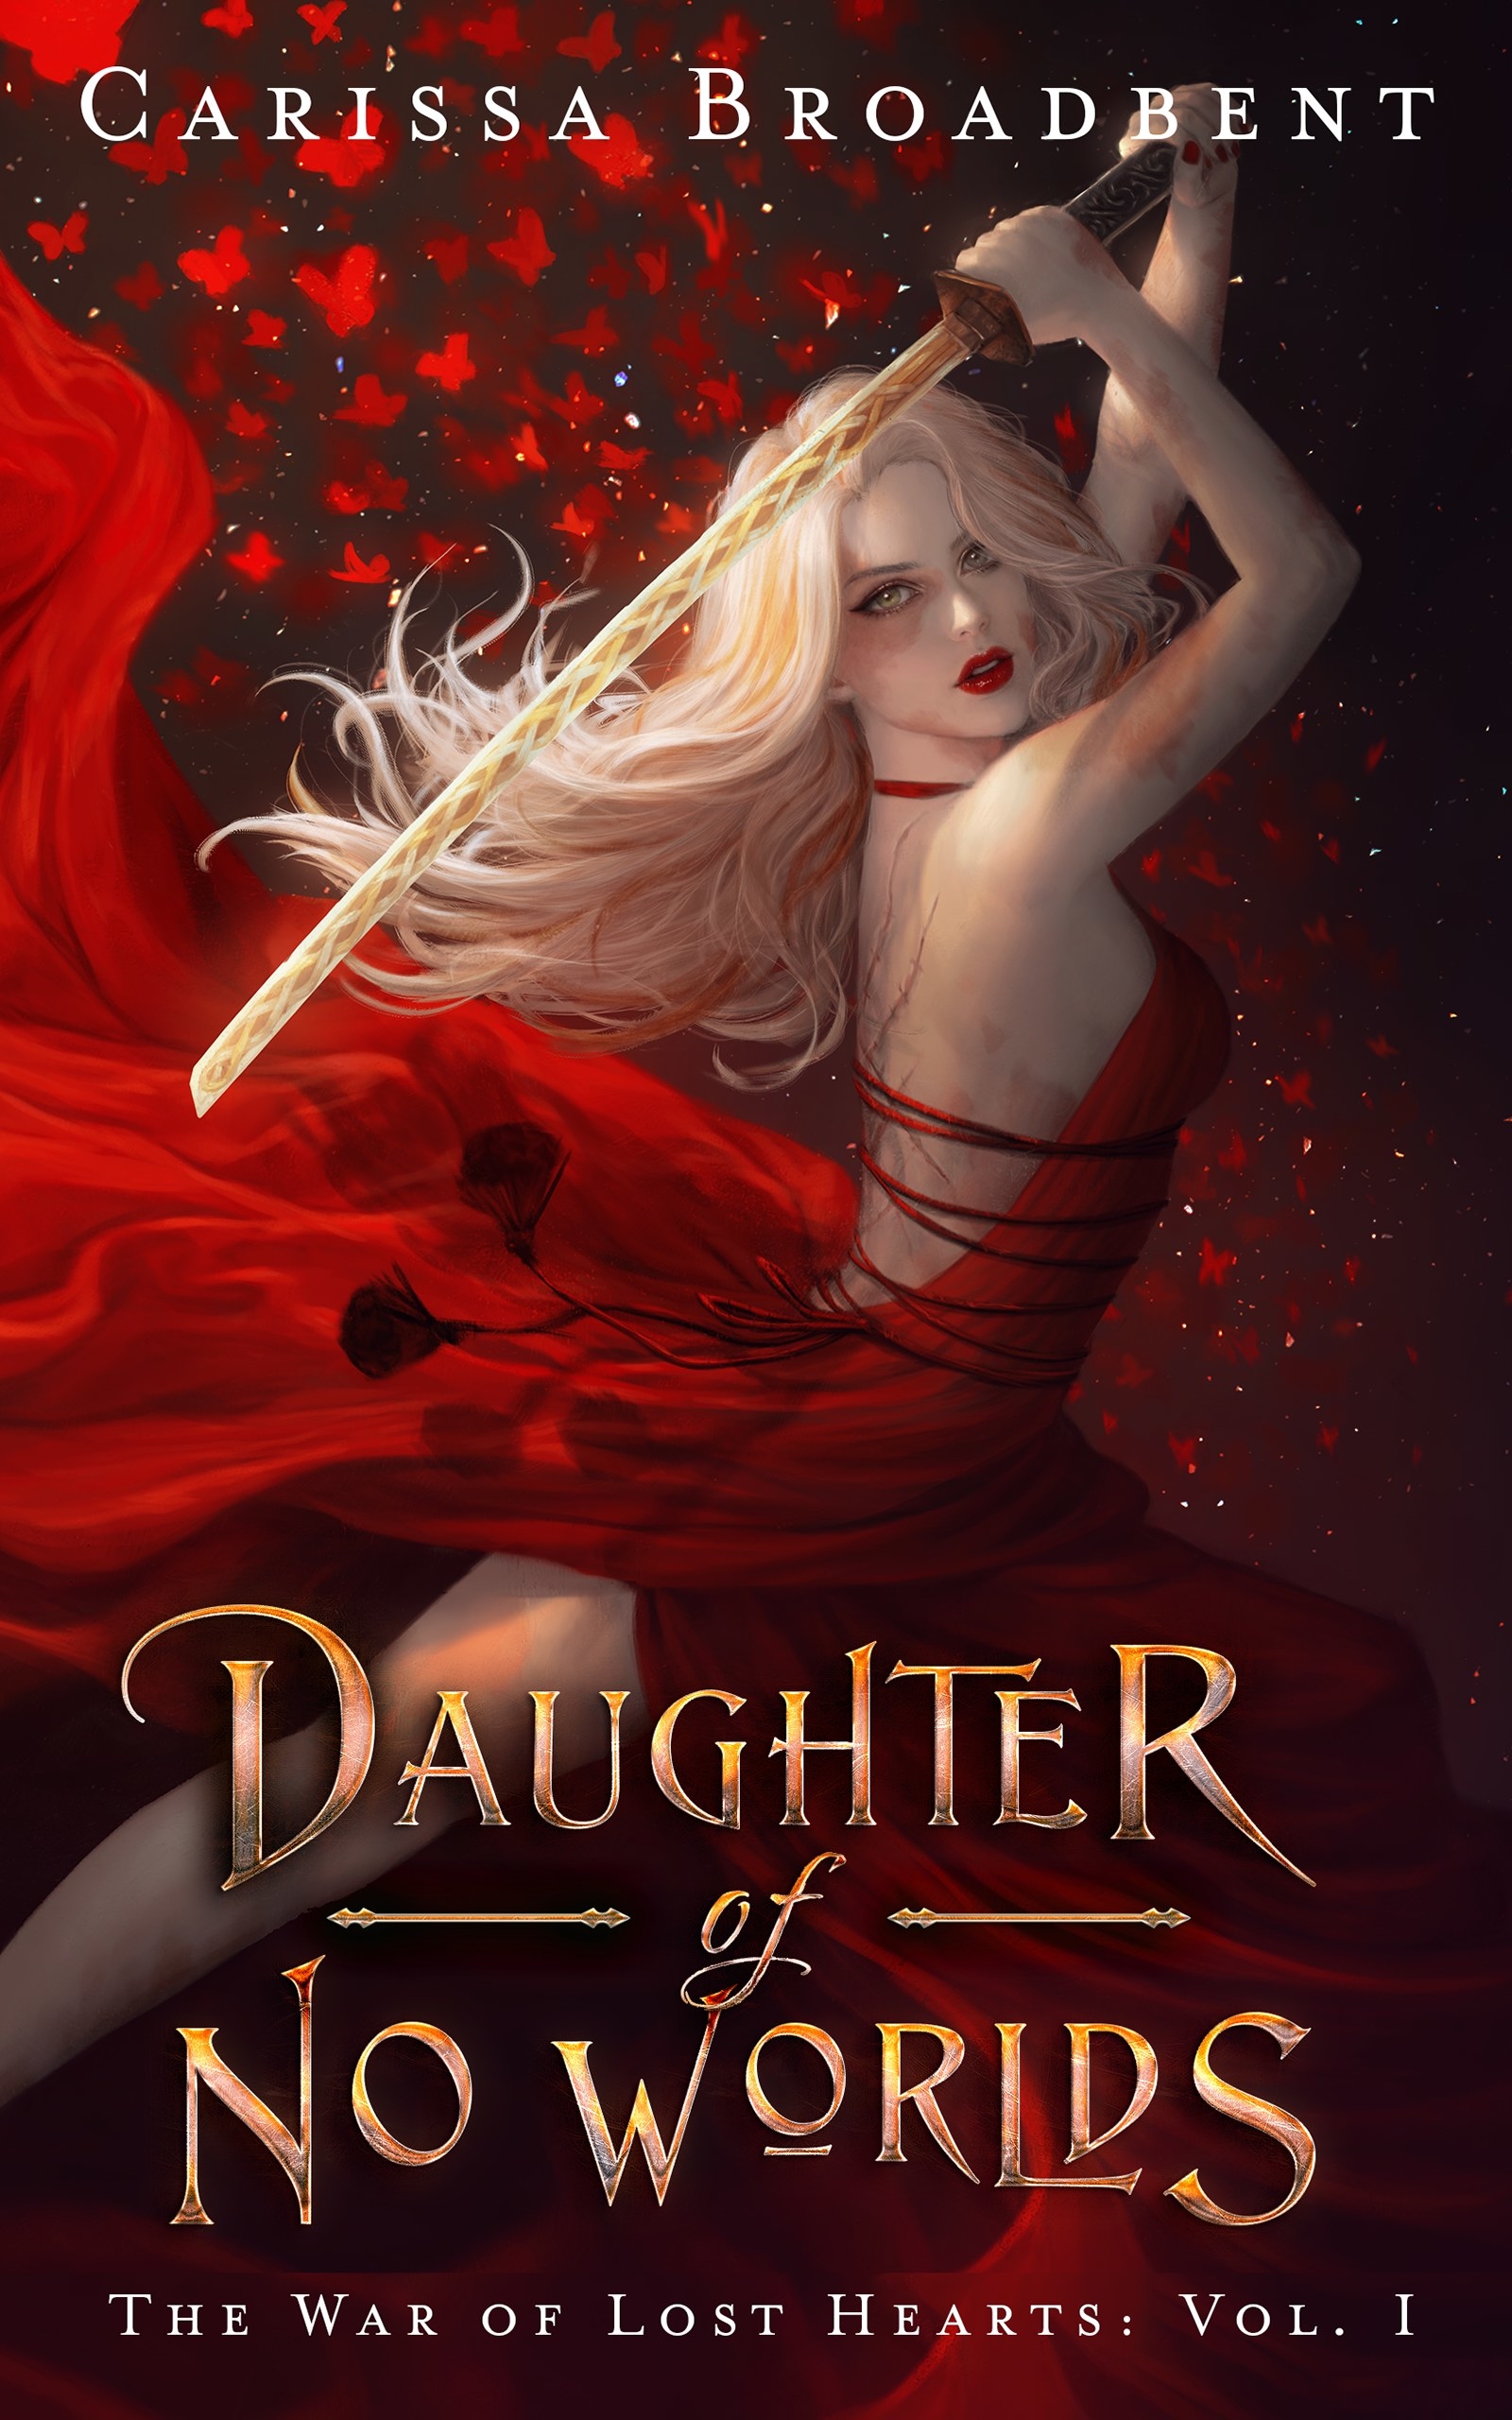 Daughter of No Worlds book cover. Book by Carissa Broadbent.